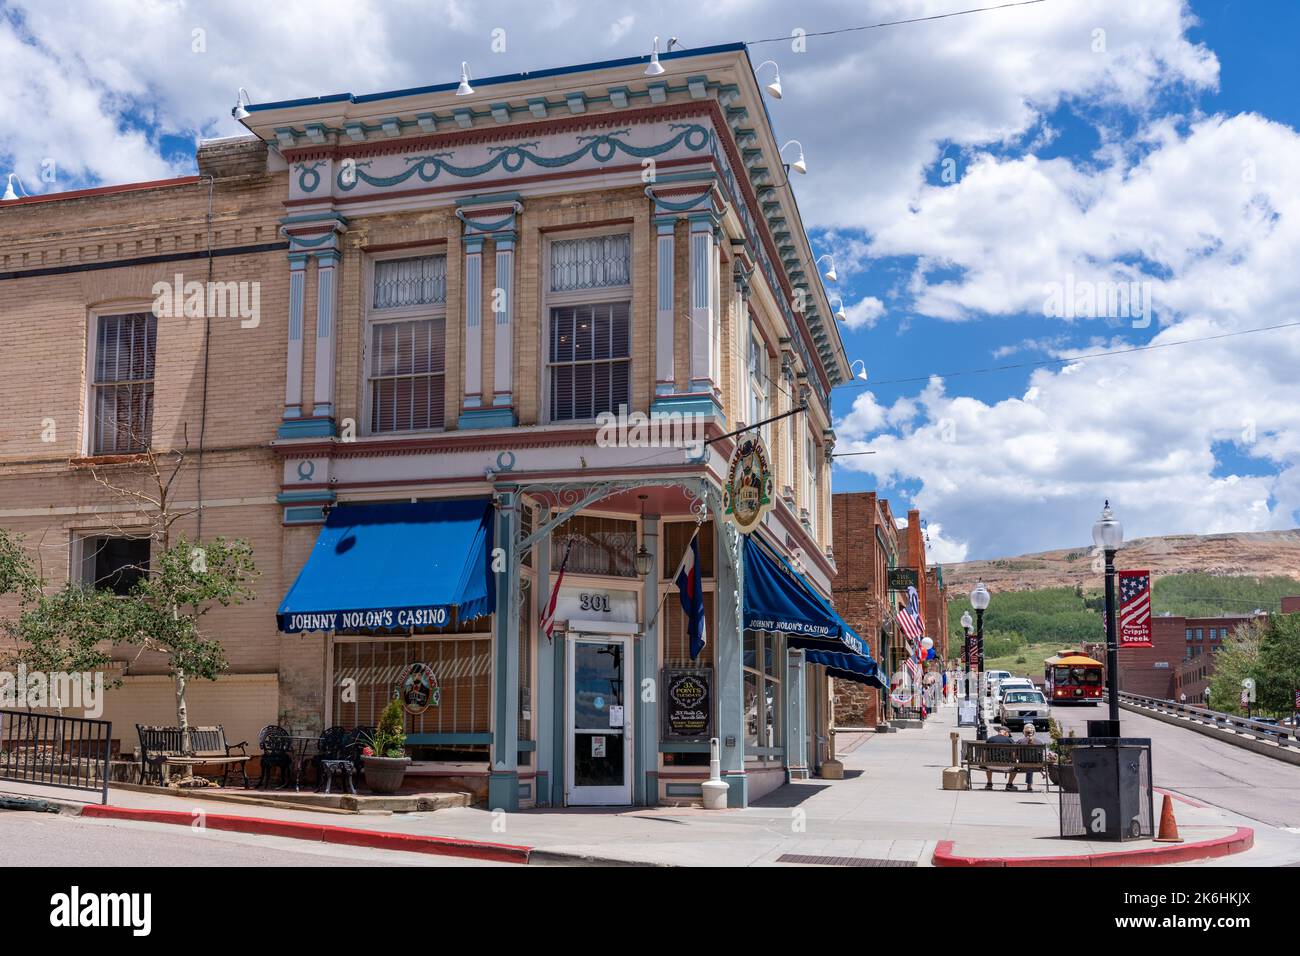 cripple creek co july 9 2022 johnny nolons casino is named for the original johnny nolon saloon gambling emporium opened in this historic buil 2K6HKJX